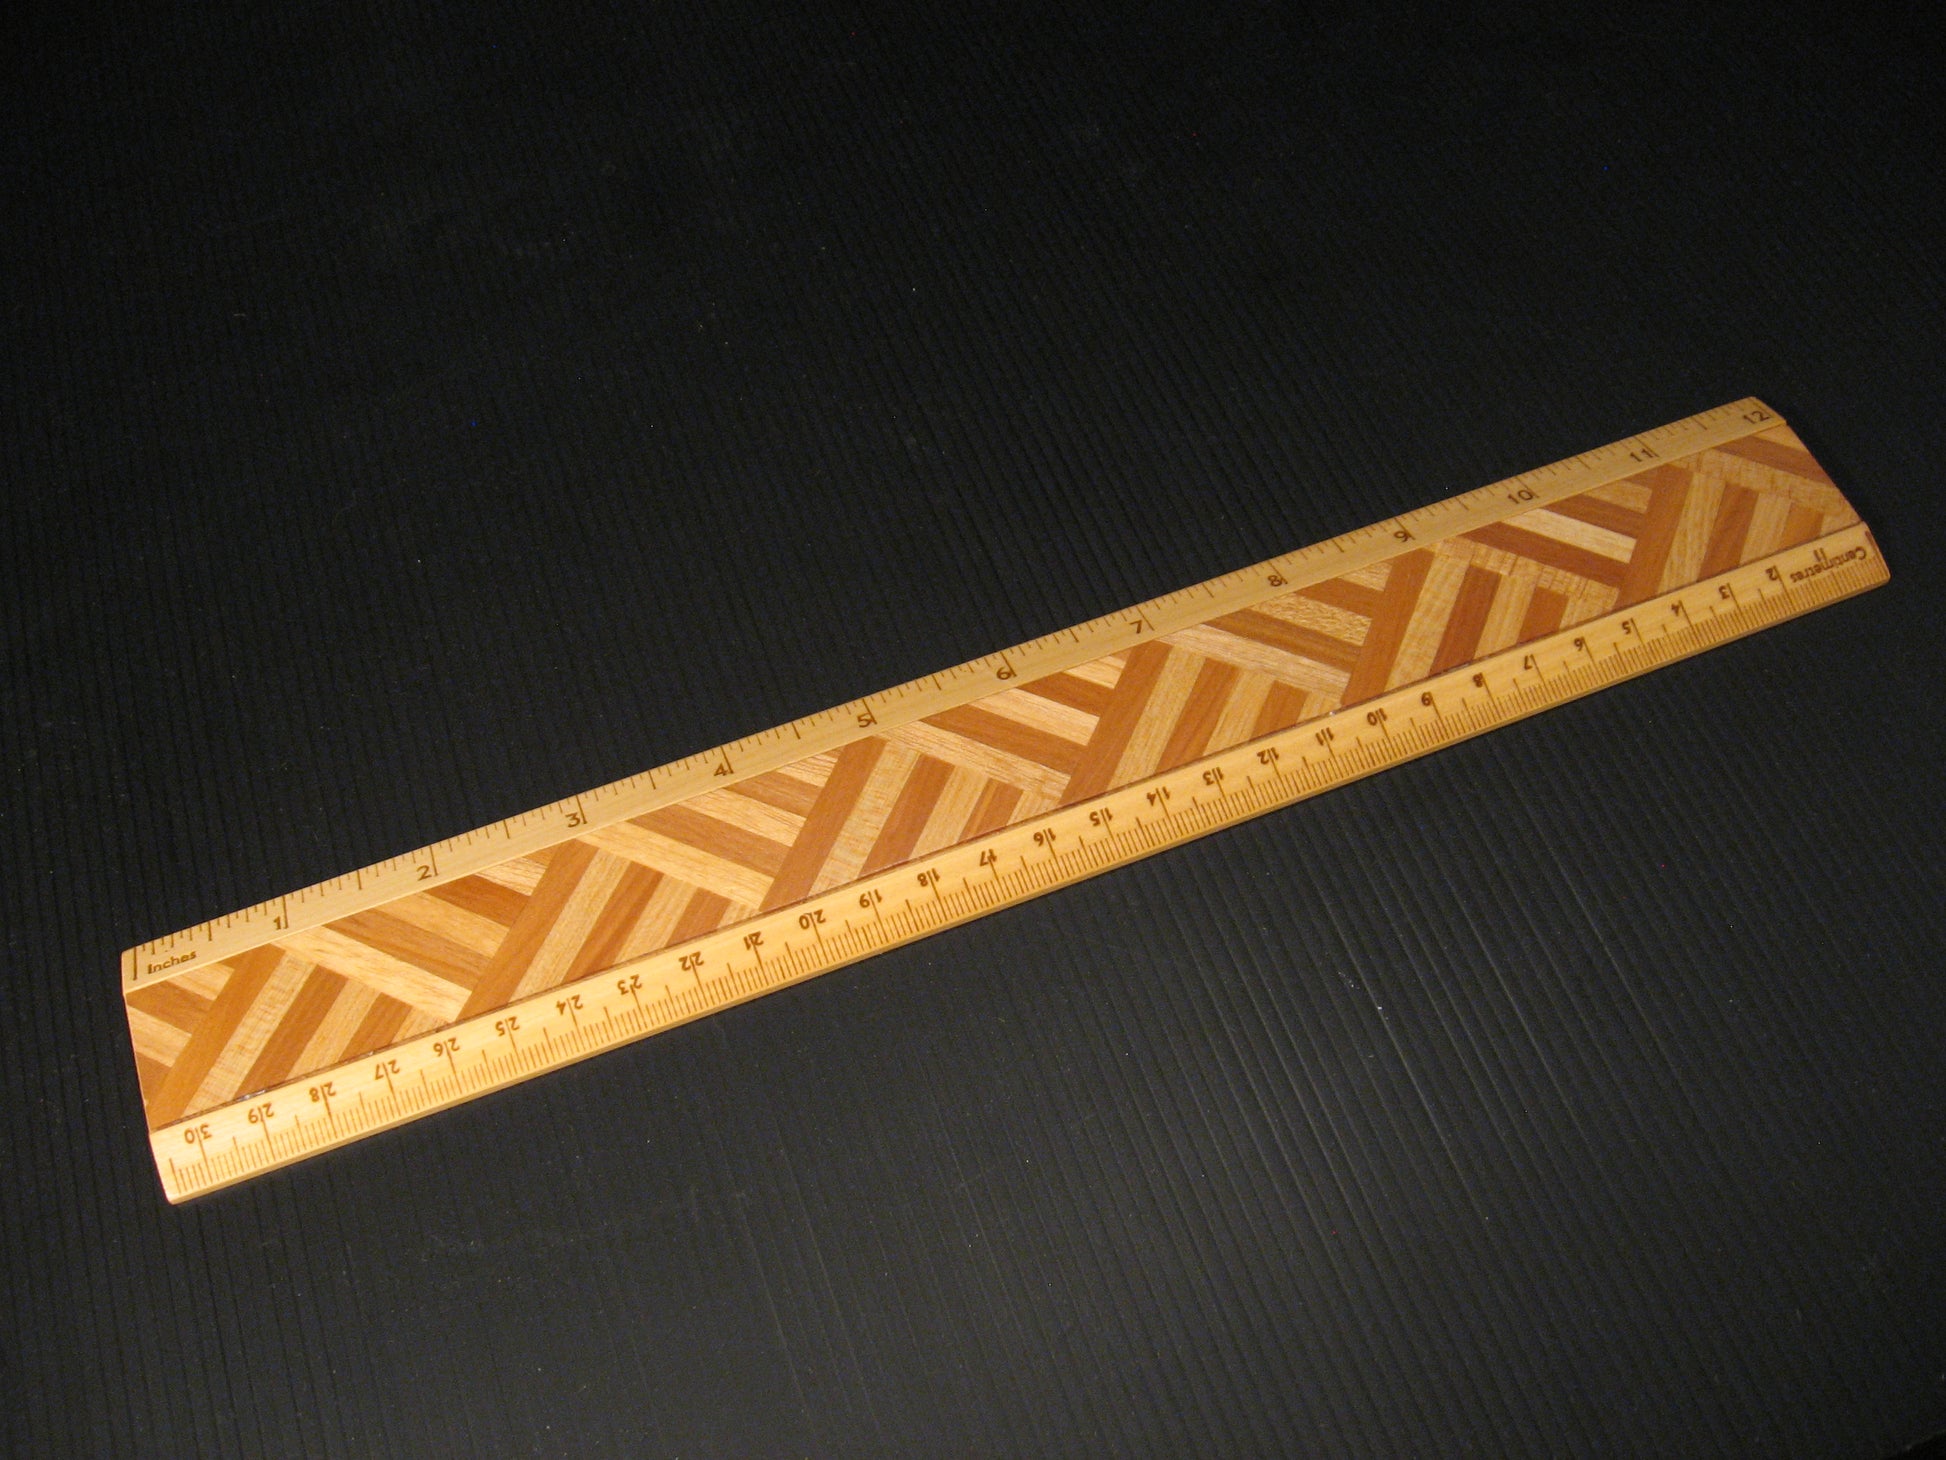 Ruler from NZ Native Timbers Totara and Tawa by Timber Arts Silver Fern Gallery